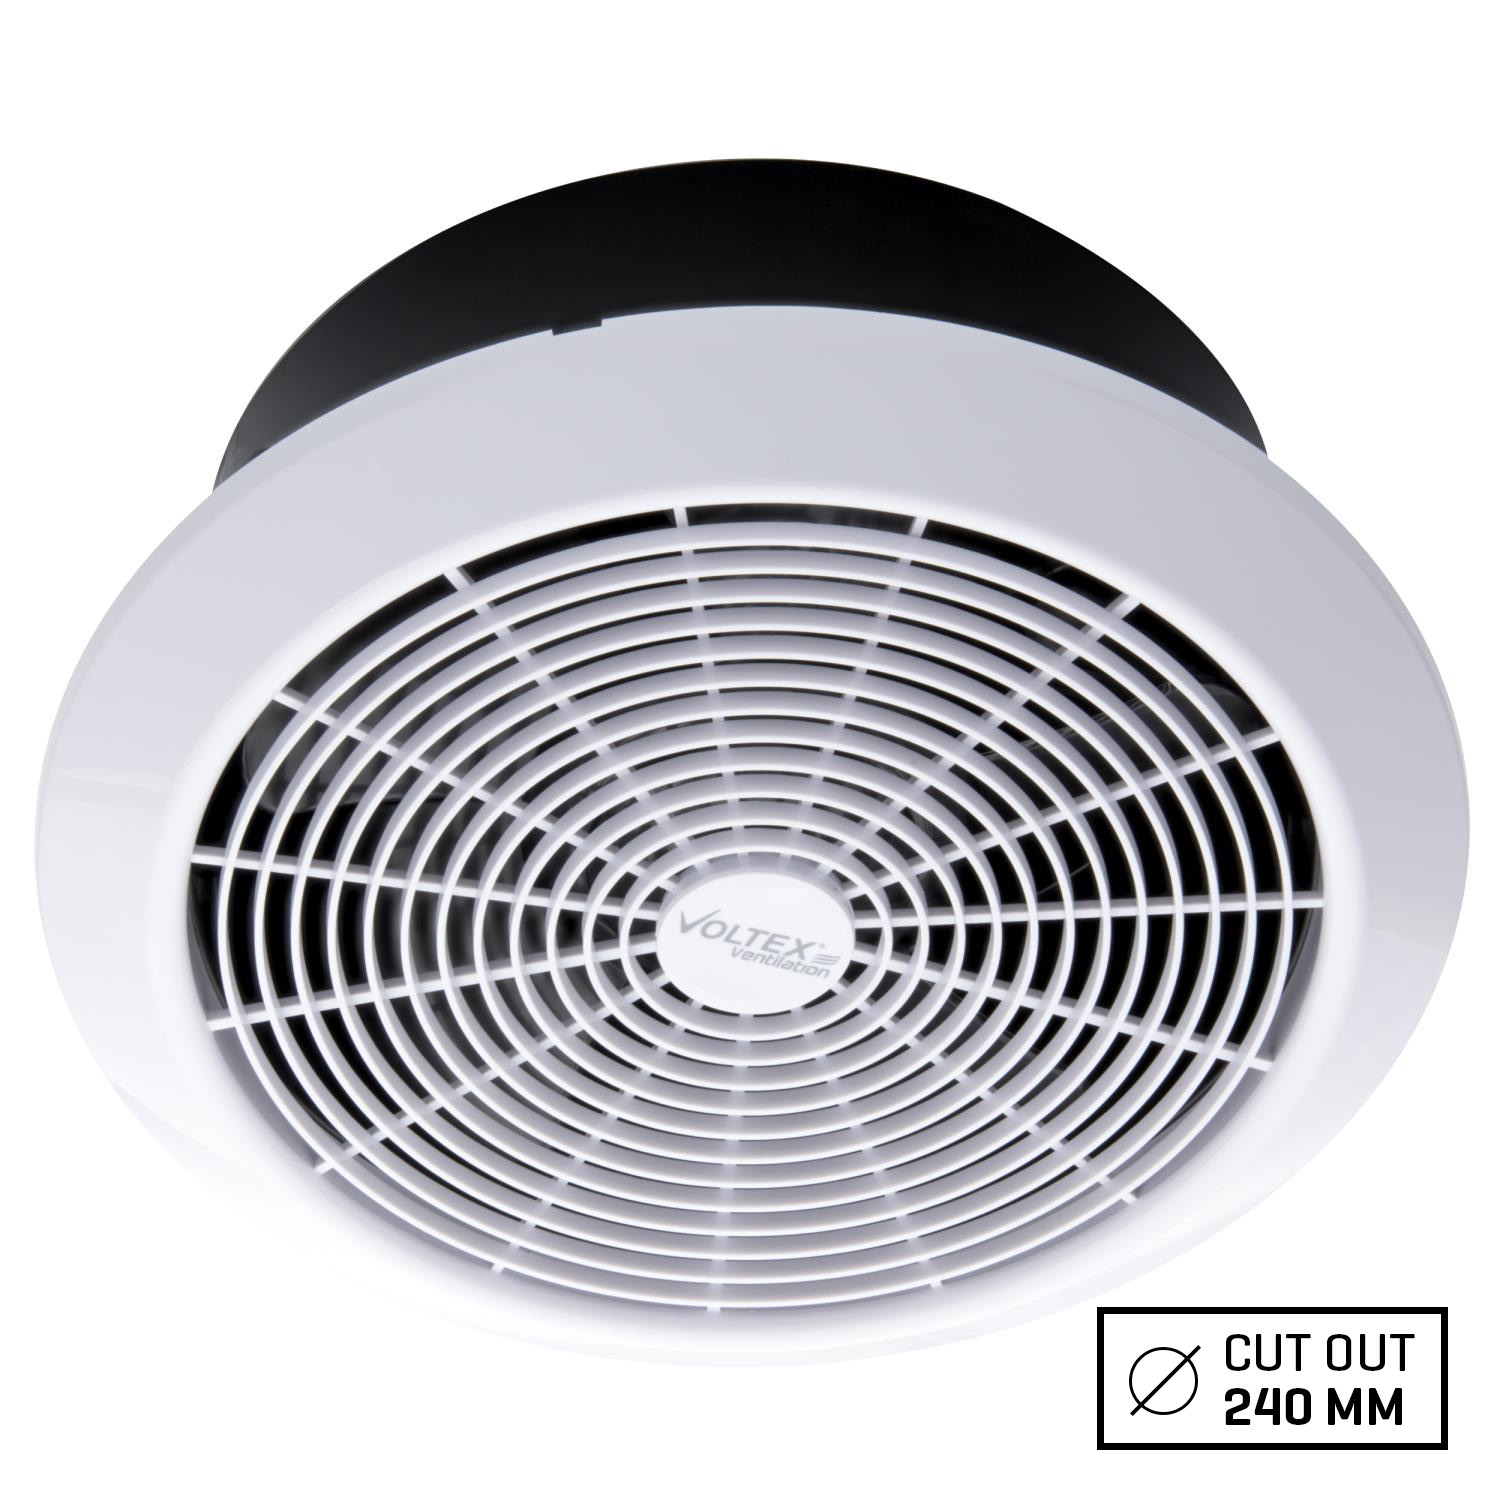 Voltex 200mm Flush Mounted Ceiling Exhaust Fan With Draft for measurements 1500 X 1500